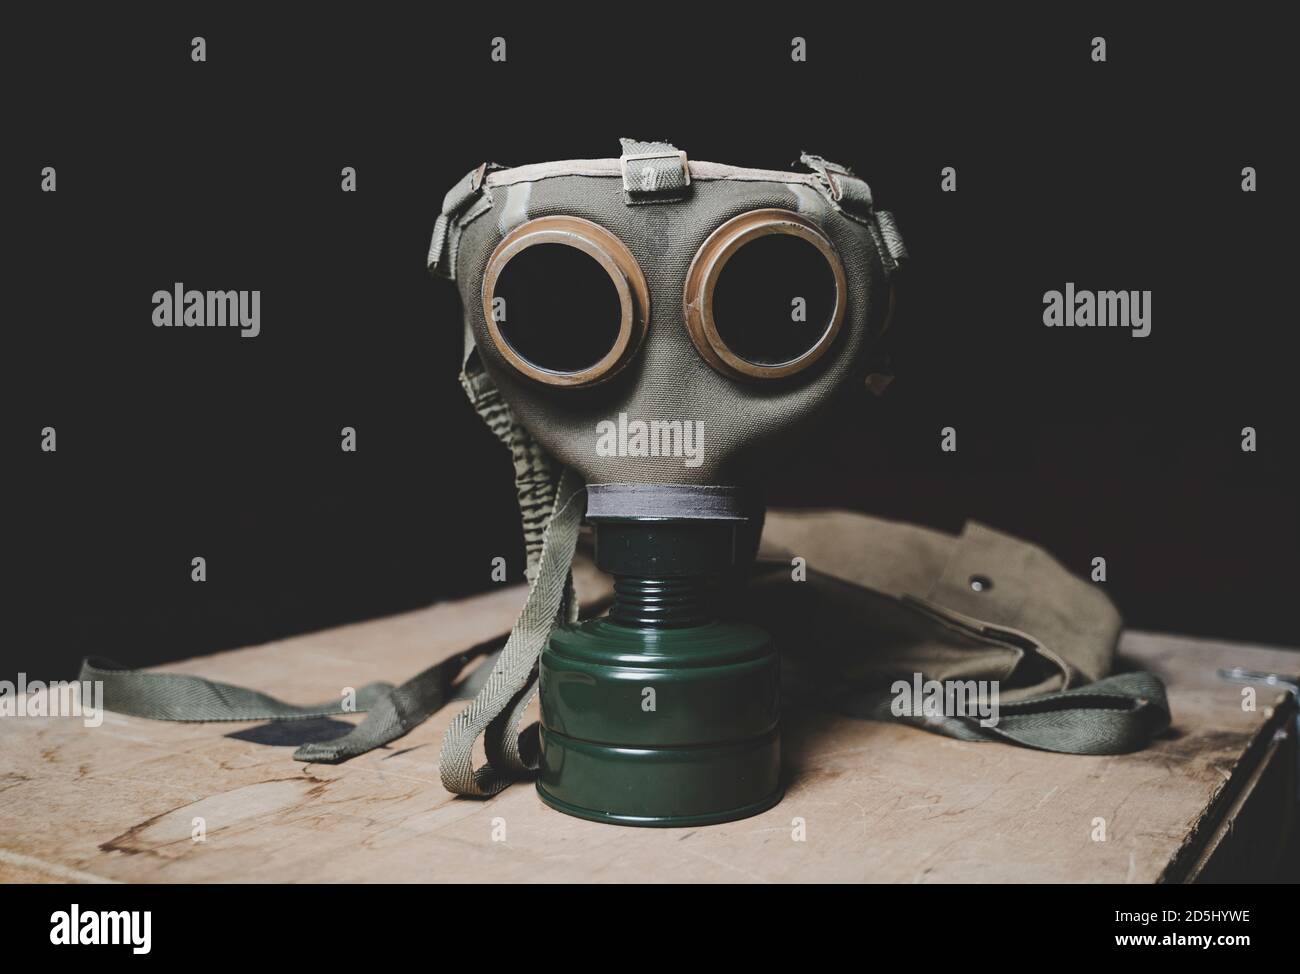 An old military gas mask on wood surface. Side view, flat. Dark background. Stock Photo